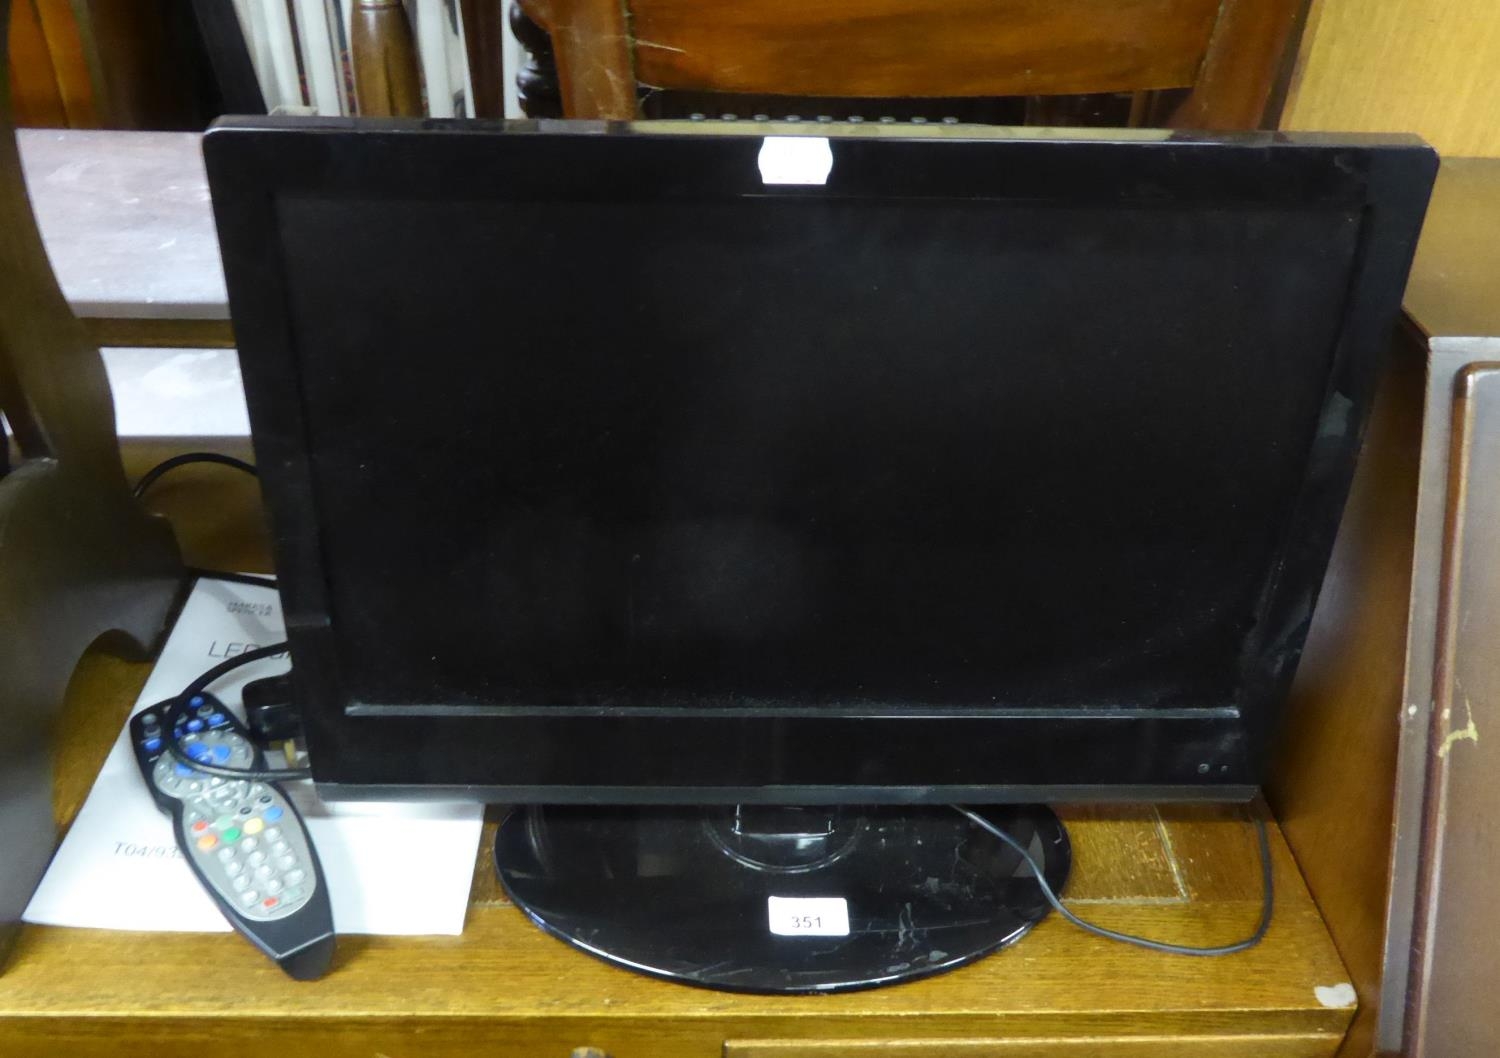 MARKS AND SPENCER 19" TELEVISION/DVD PLAYER WITH REMOTE CONTROL